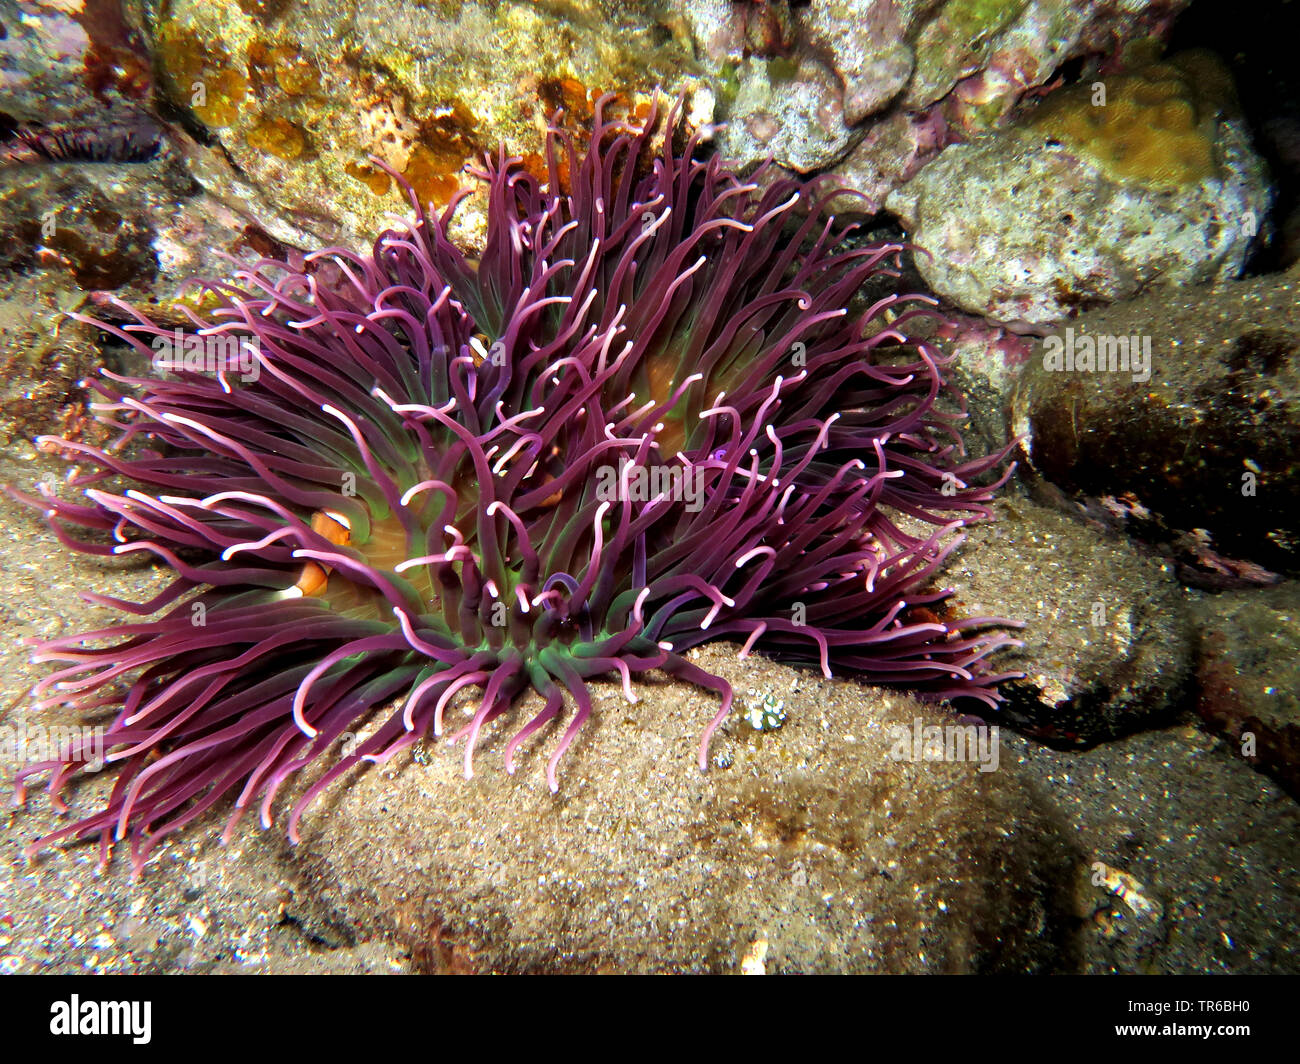 Corkscrew anemone, Long tentacle anemone, Red base anemone, Corkscrew tentacle sea anemone (Macrodactyla doreensis), at the reef, Philippines, Southern Leyte, Panaon Island, Pintuyan Stock Photo